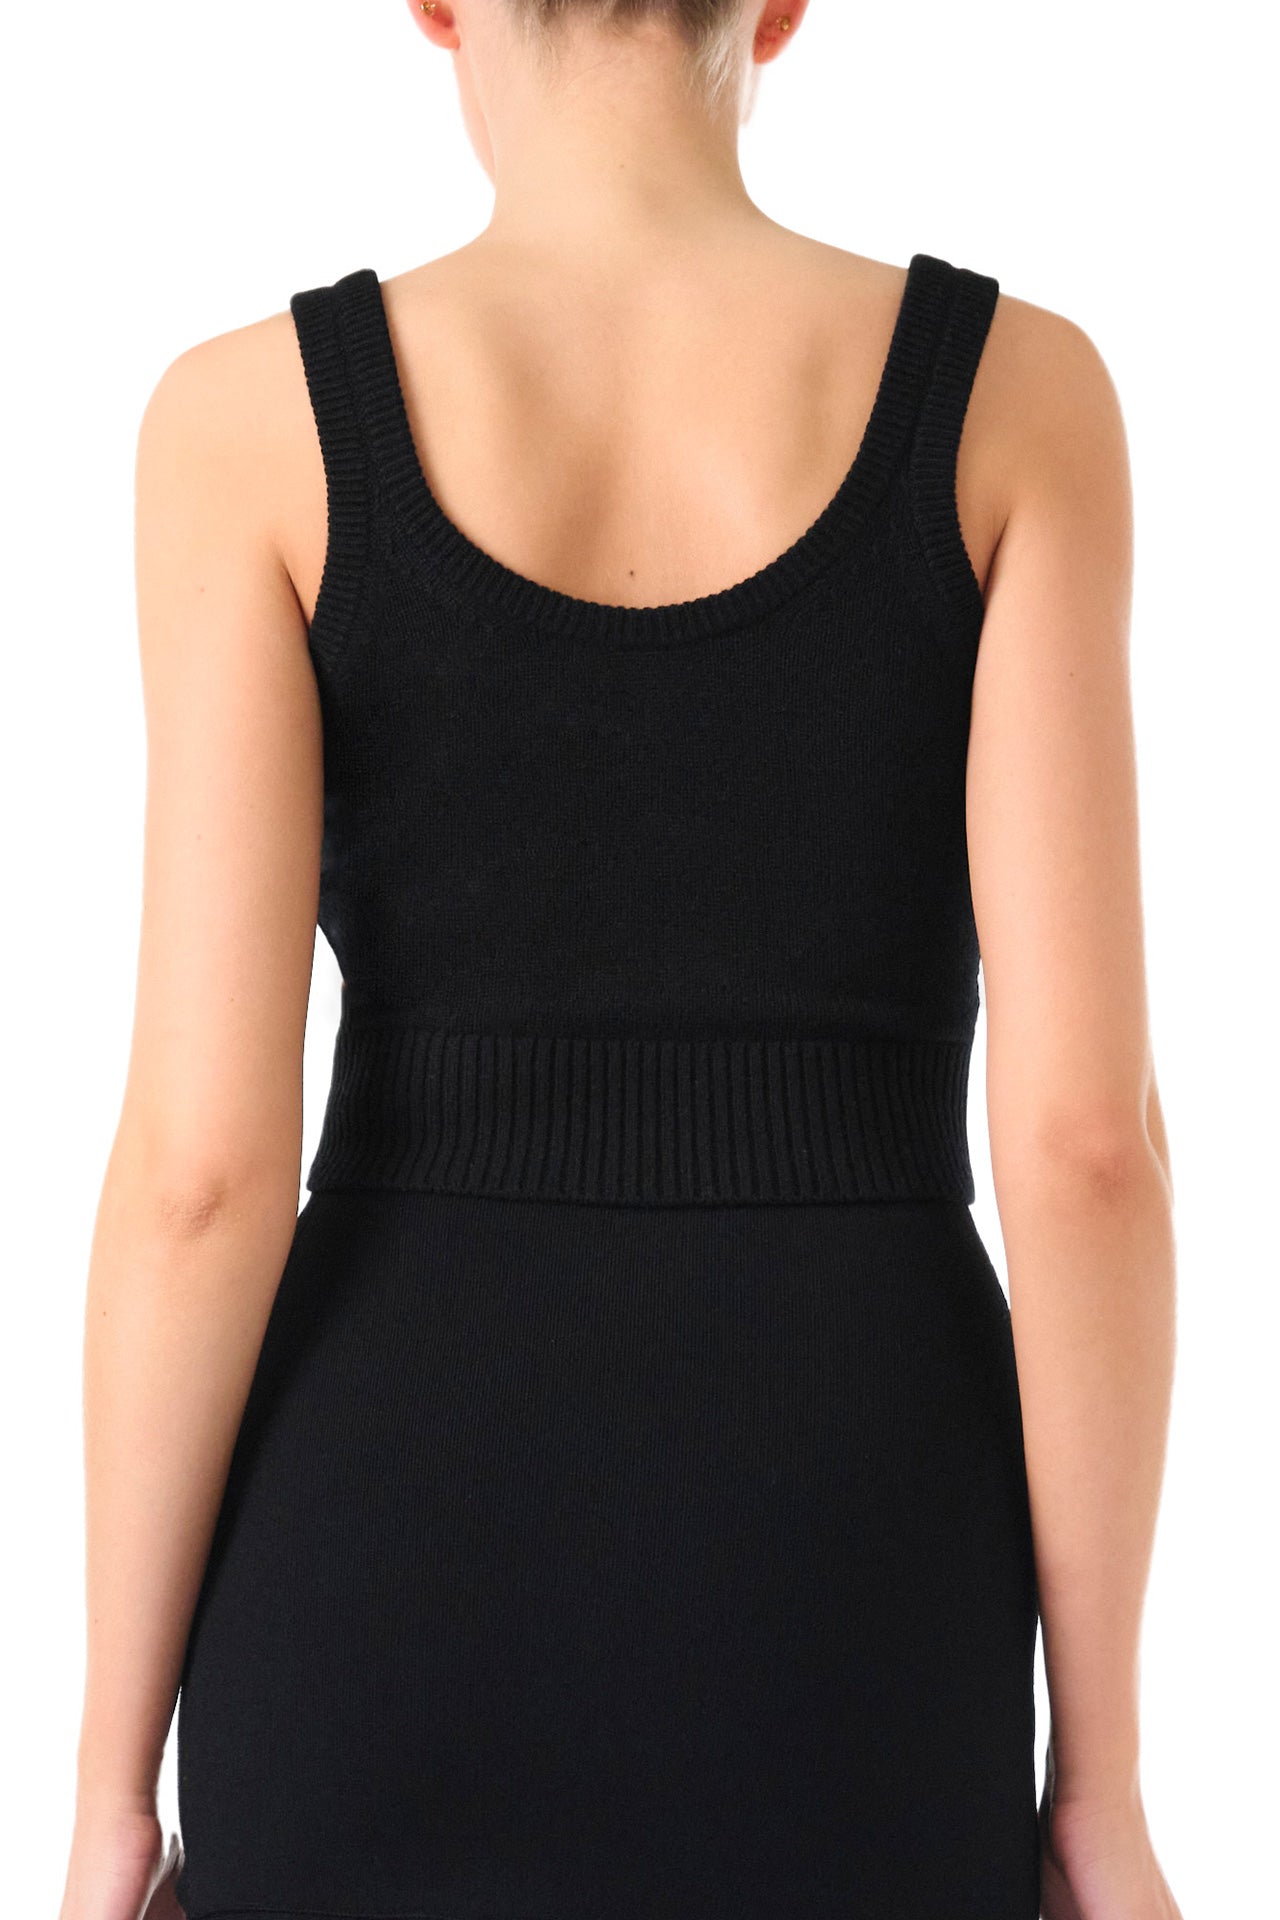 Monique Lhuillier black cashmere cropped tank with scoop neck and gold buttons - back detail.